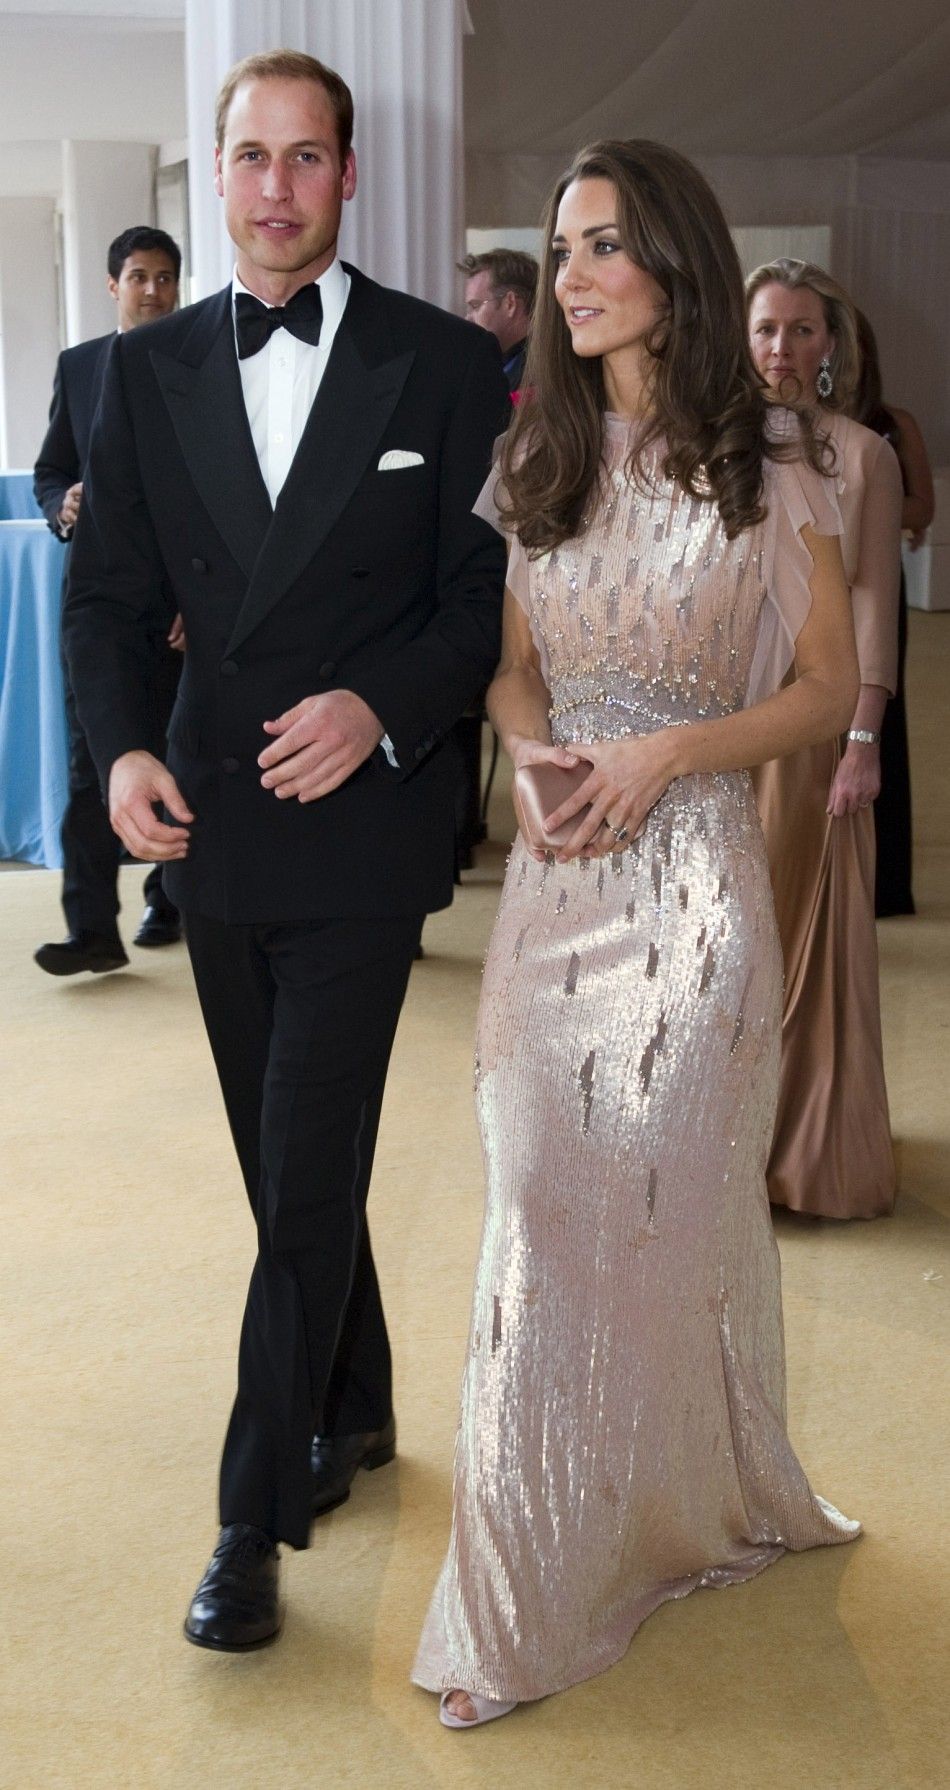 Britain039s Prince William and his wife Catherine, Duchess of Cambridge pose for photographers as they arrive for a charity dinner at Kensington Palace in London June 9, 2011.